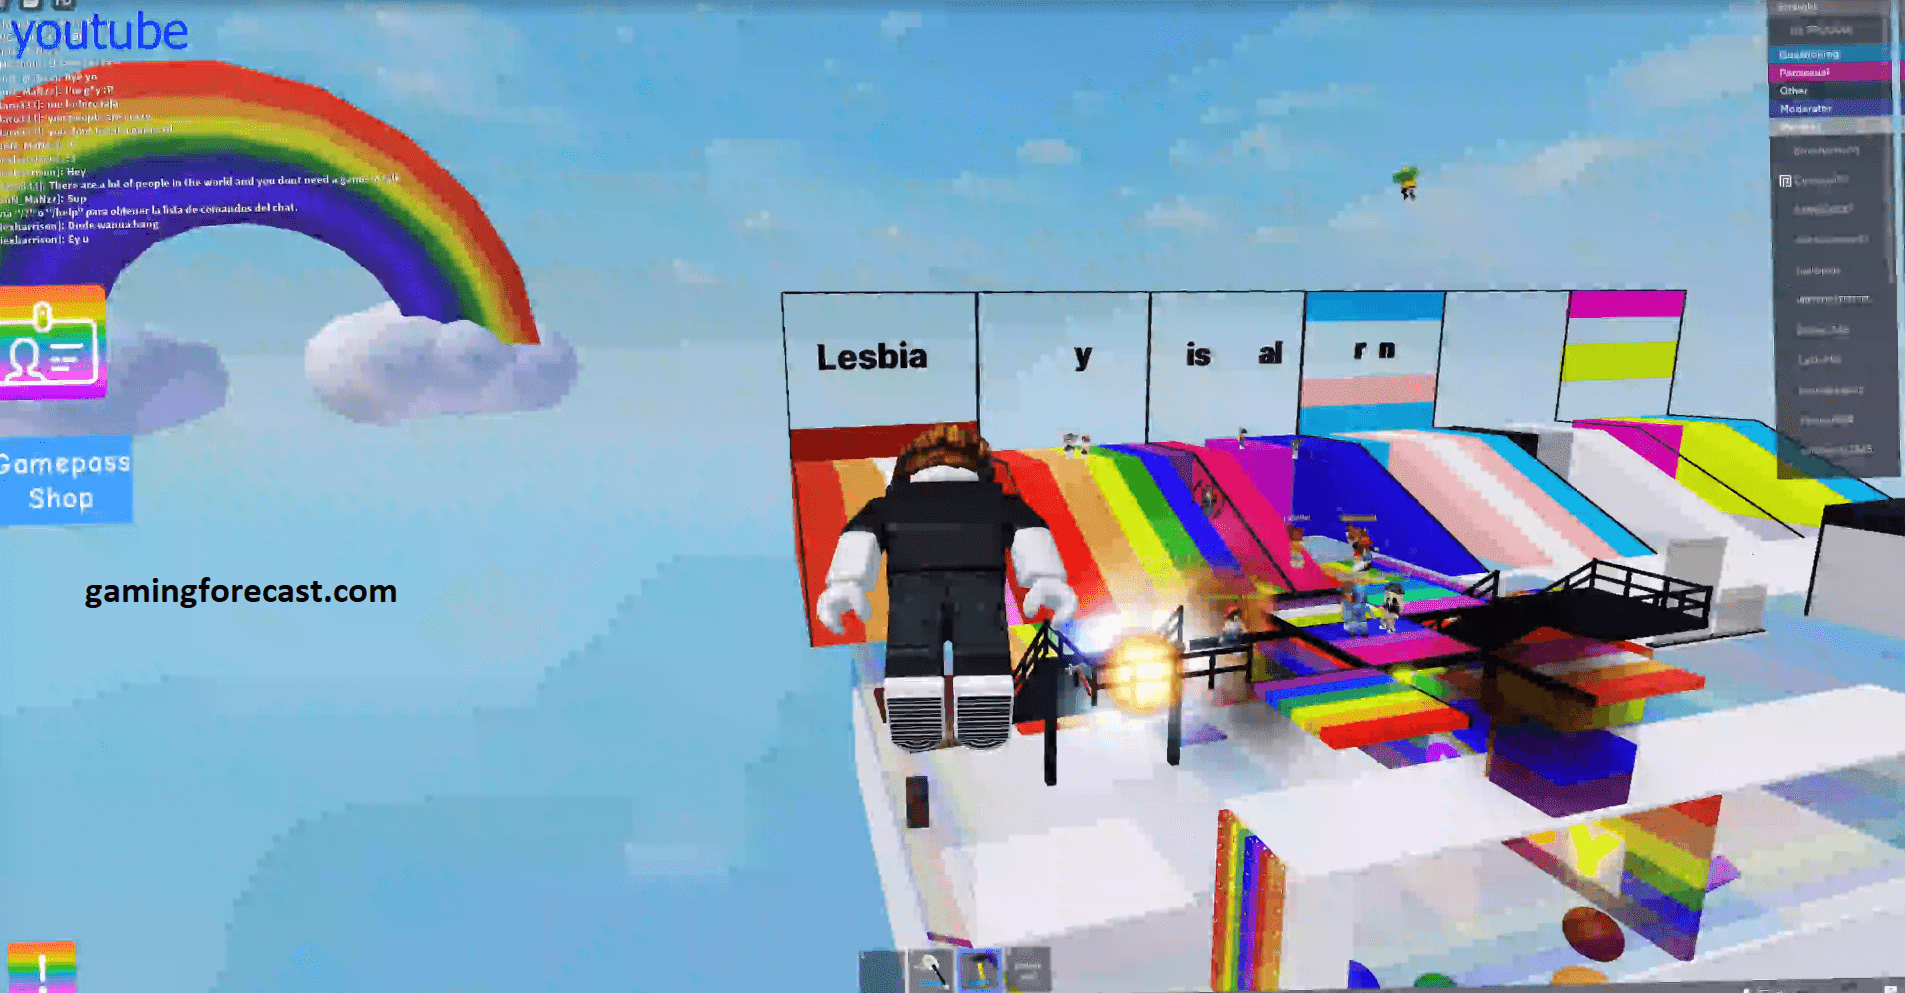 Roblox Hack Download Pc Destroy Lobby Fly Aimbot Scripts 2021 Gaming Forecast Download Free Online Game Hacks - crack roblox hack download